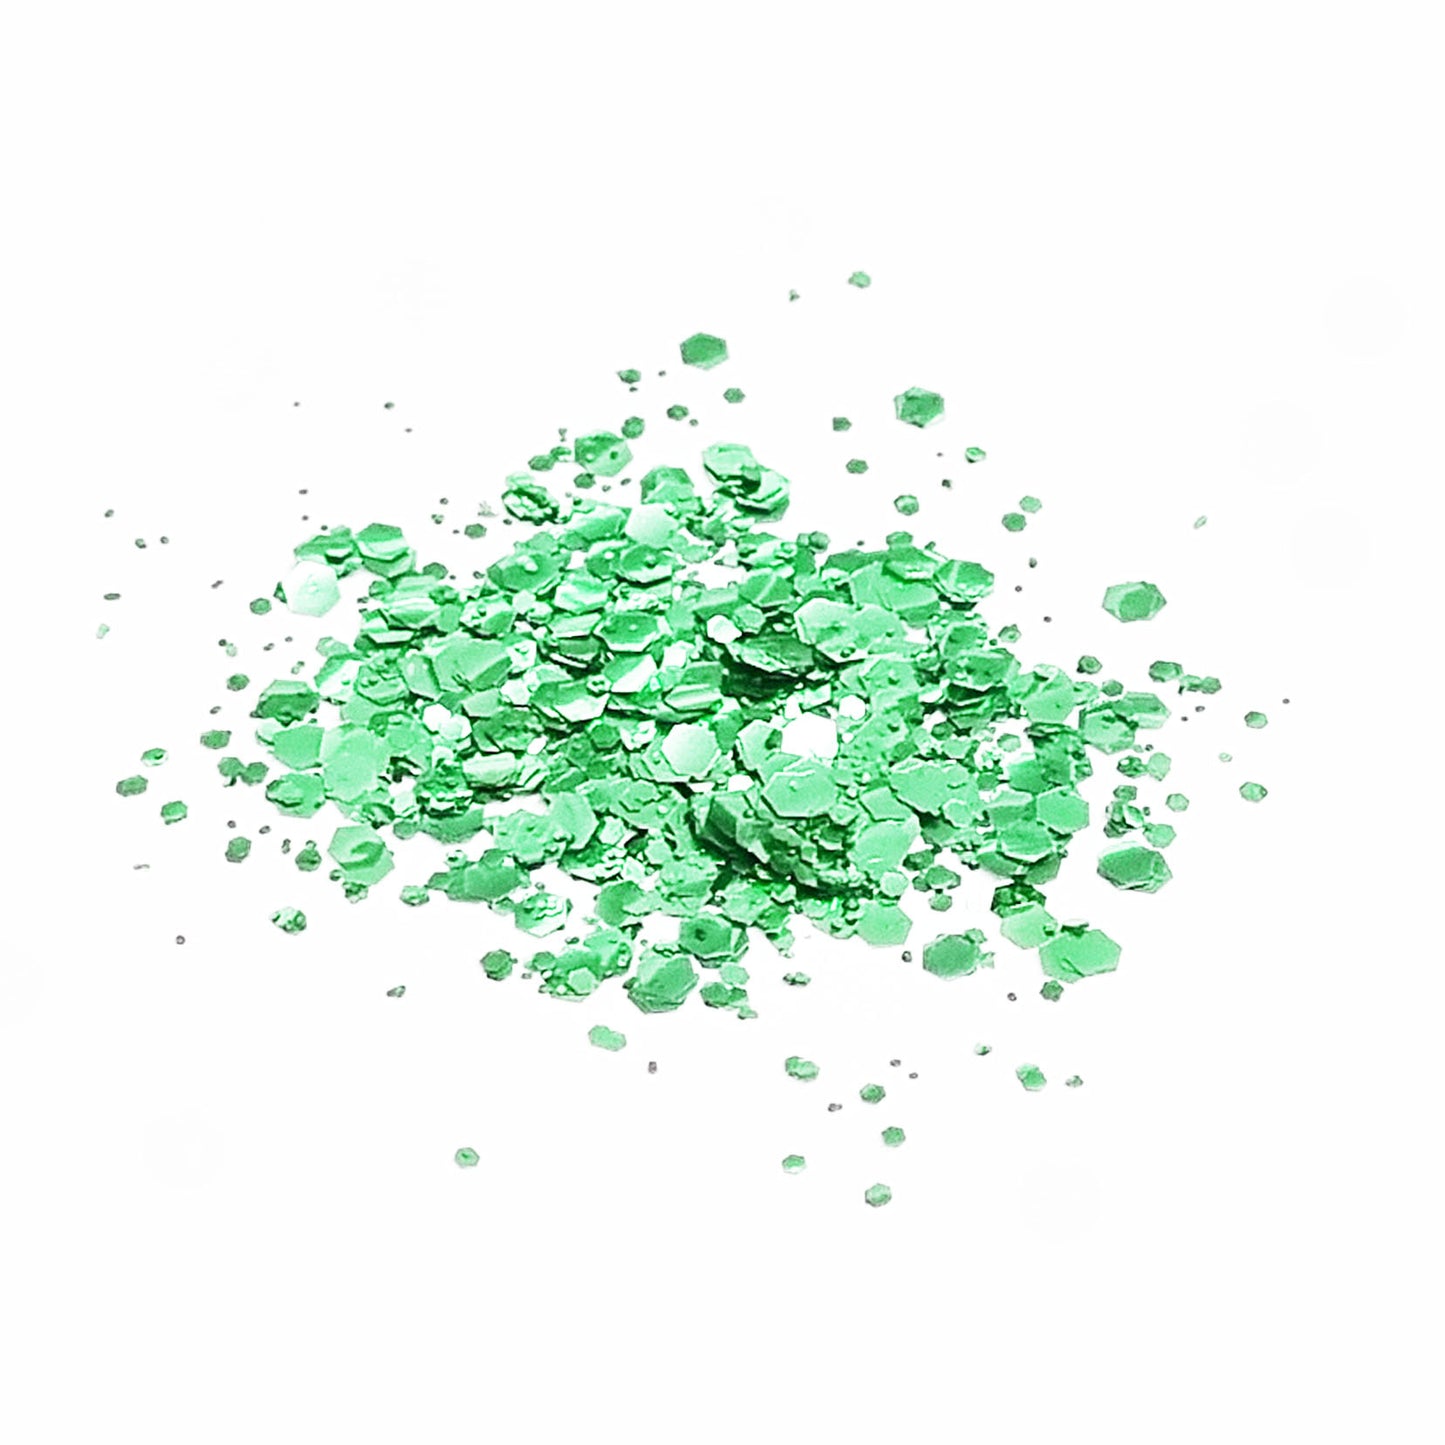 Spring Green Biodegradable Cosmetic Glitter | Mix | Truly Personal | Wax Melt Bath Bombs Soap